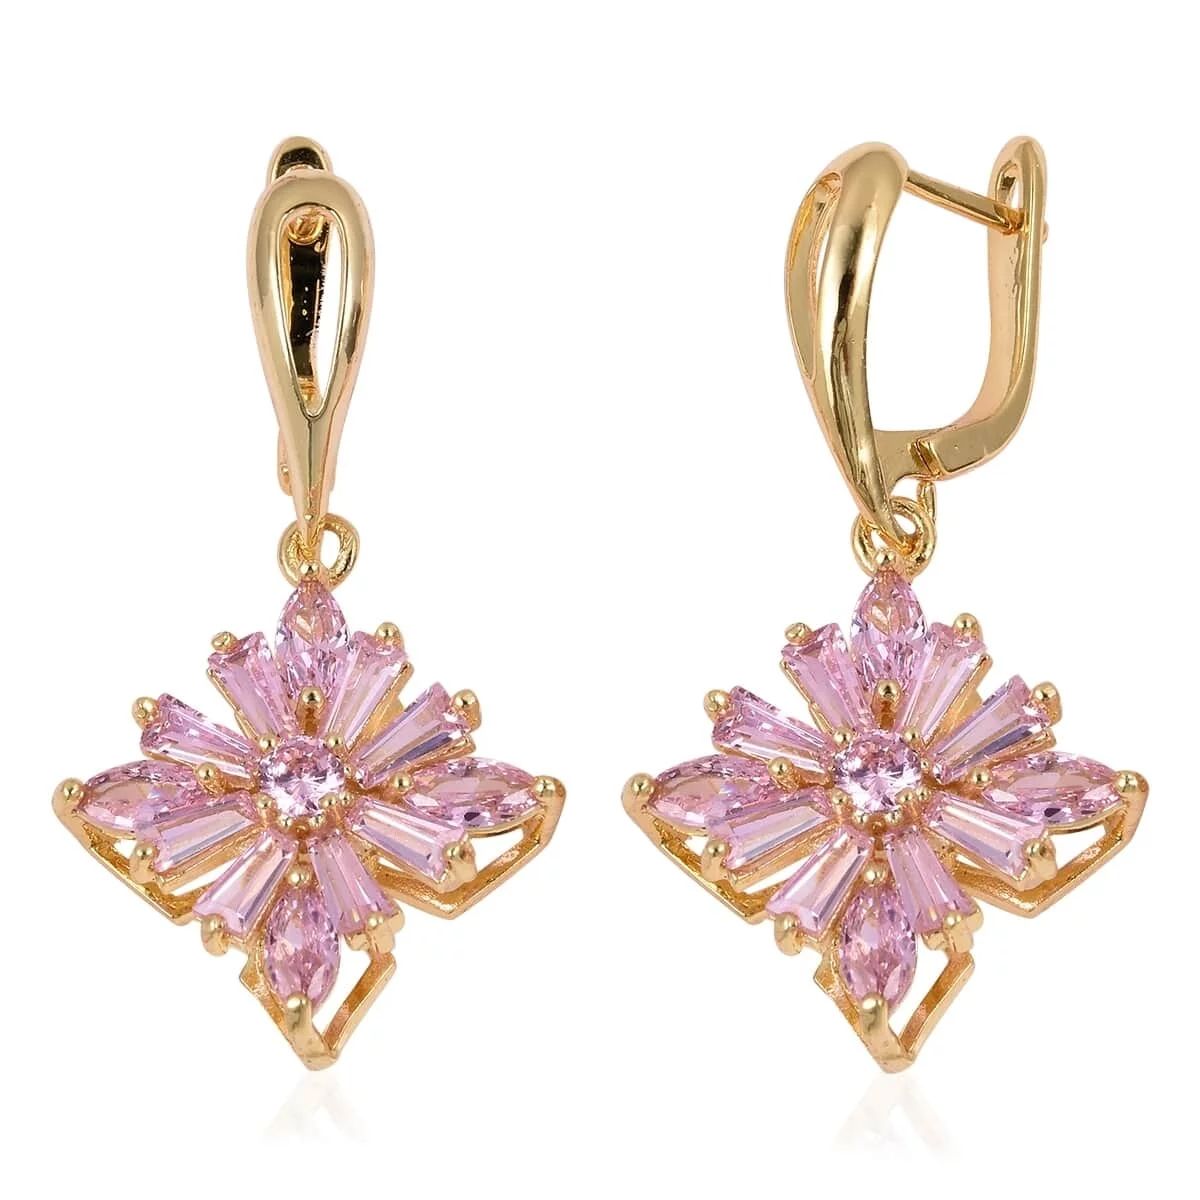 Shop LC Princess Cut Pink Cubic Zirconia Flower Floral Drop Dangle Earrings Rose Gold Plated for ... | Walmart (US)